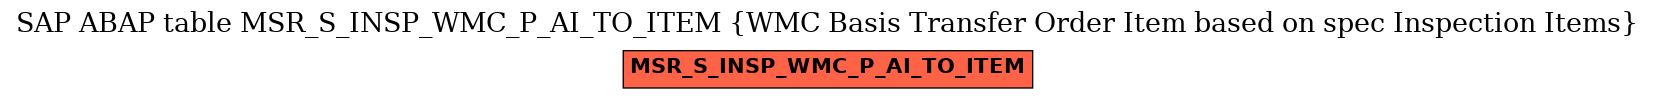 E-R Diagram for table MSR_S_INSP_WMC_P_AI_TO_ITEM (WMC Basis Transfer Order Item based on spec Inspection Items)